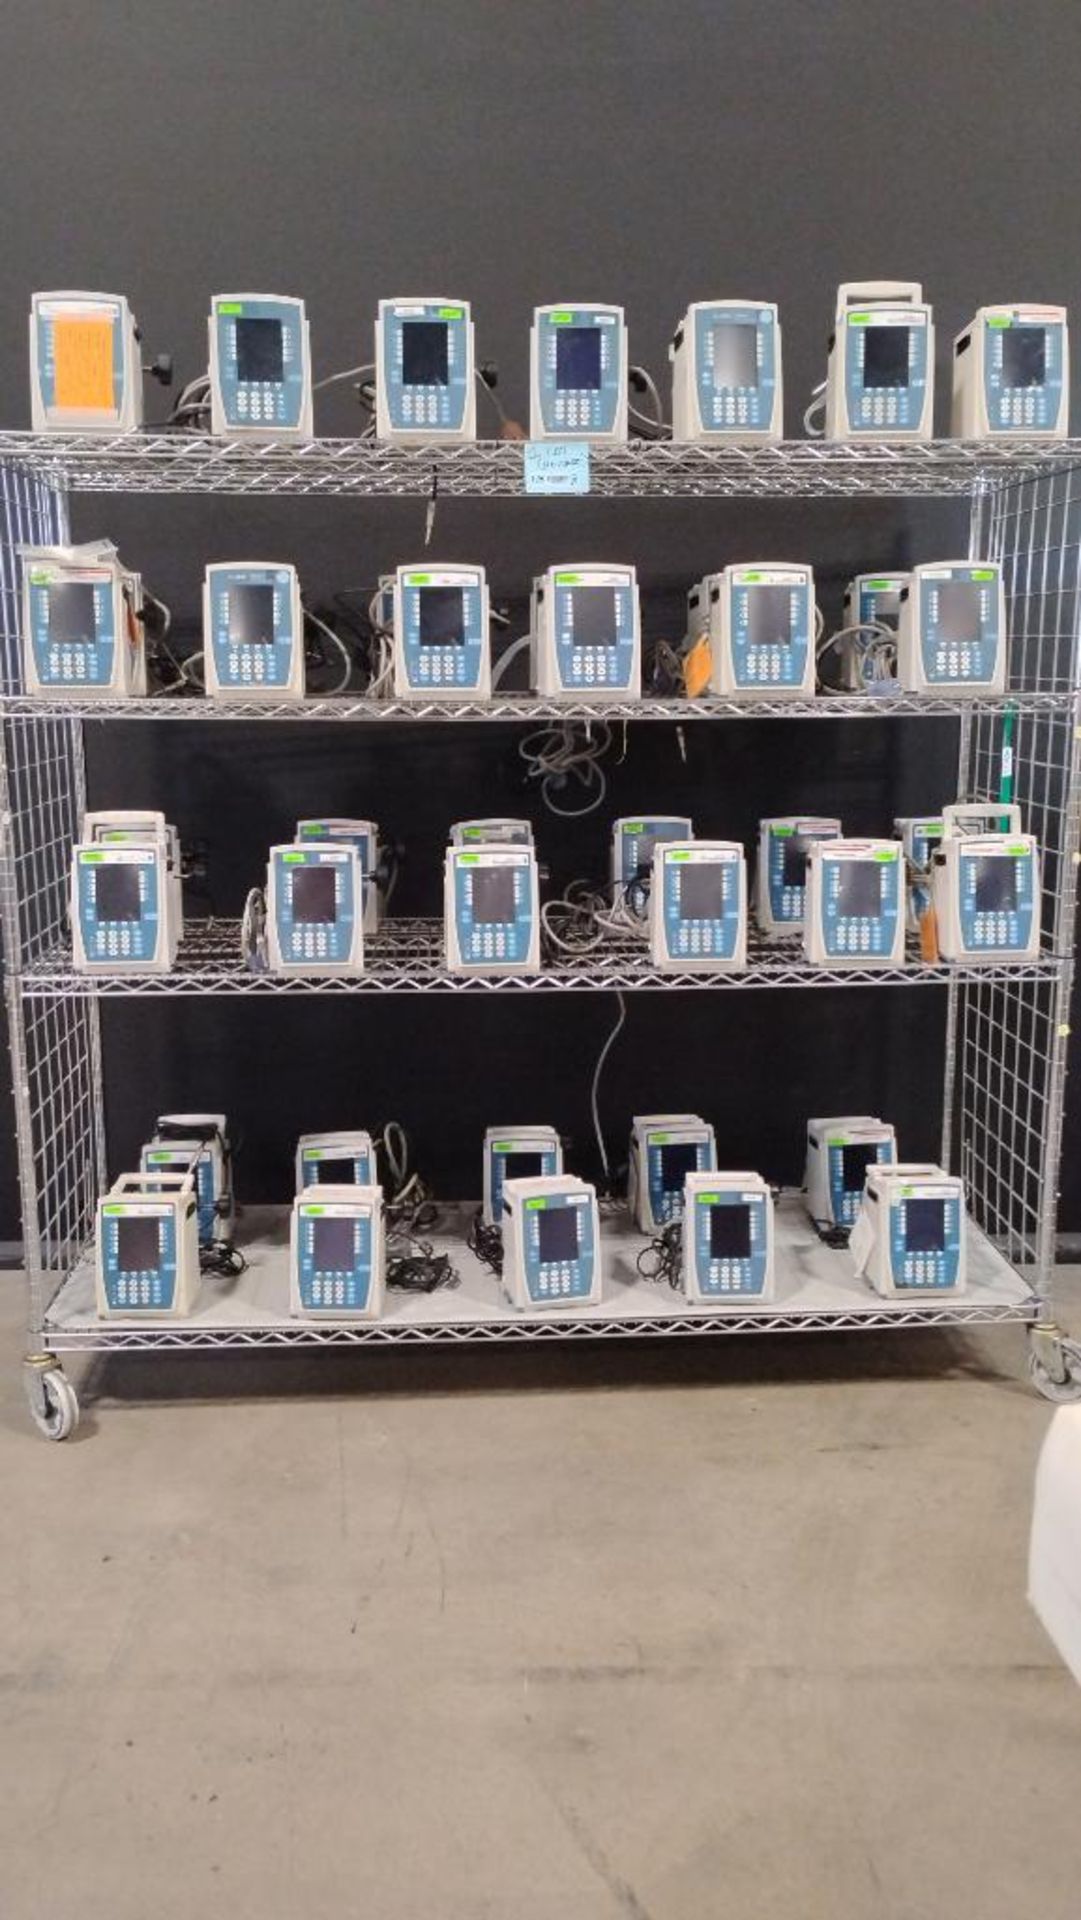 LOT OF ALARIS PC 8000 SERIES INFUSION PUMPS